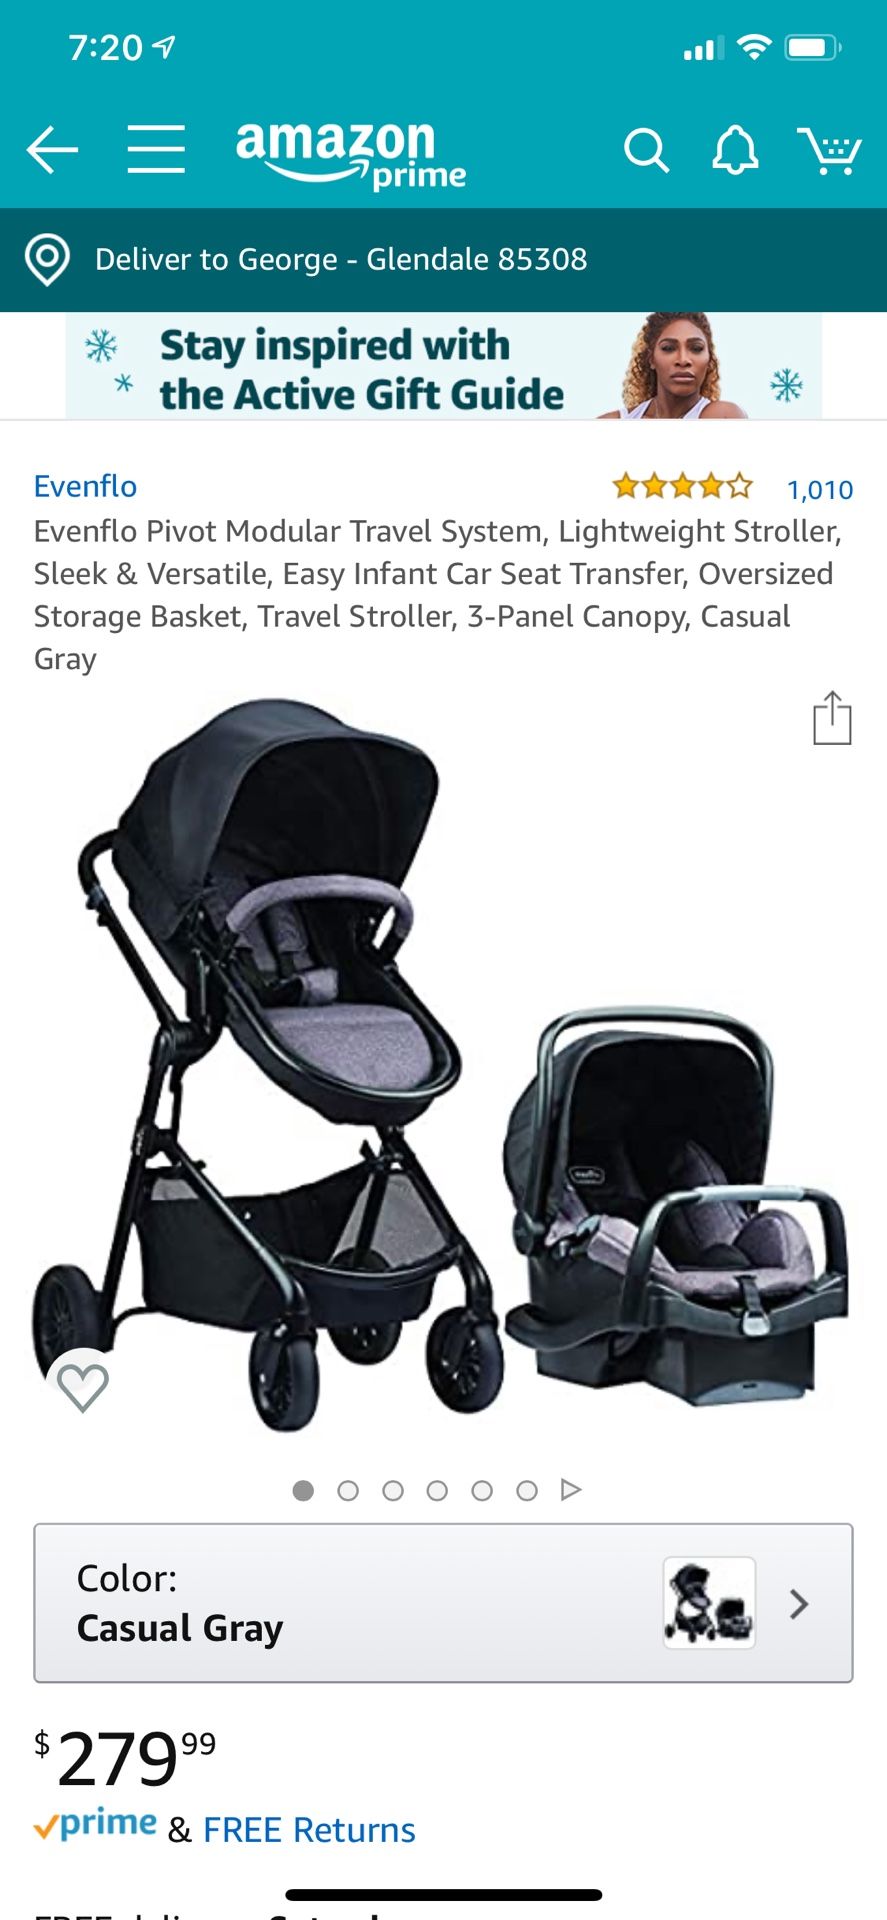 Brand new Evenflo carseat and stroller travel system